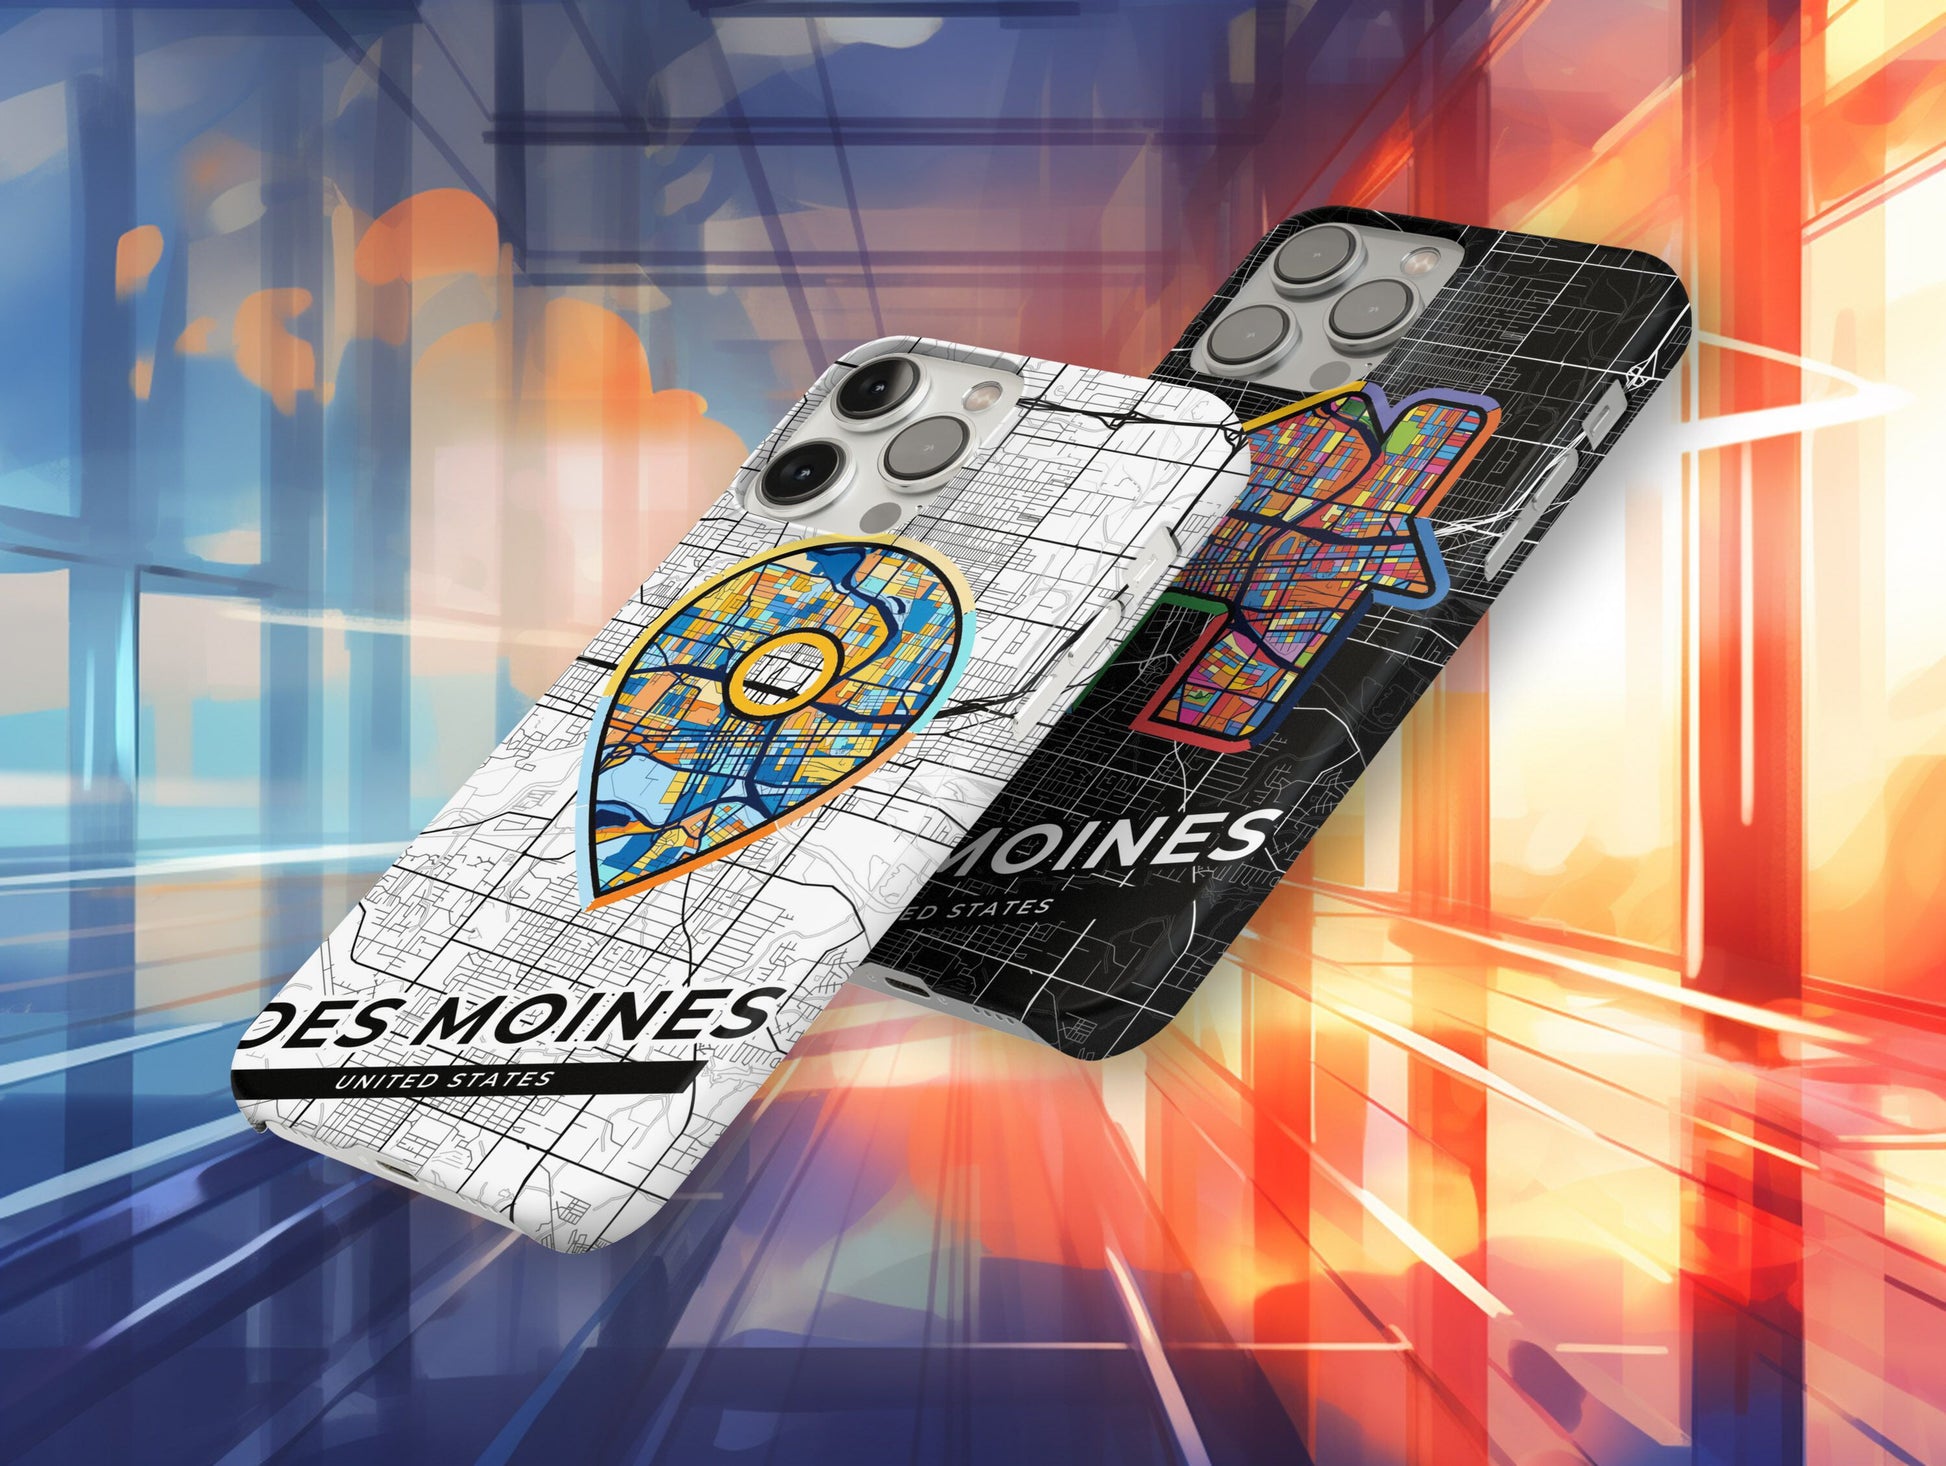 Des Moines Iowa slim phone case with colorful icon. Birthday, wedding or housewarming gift. Couple match cases.